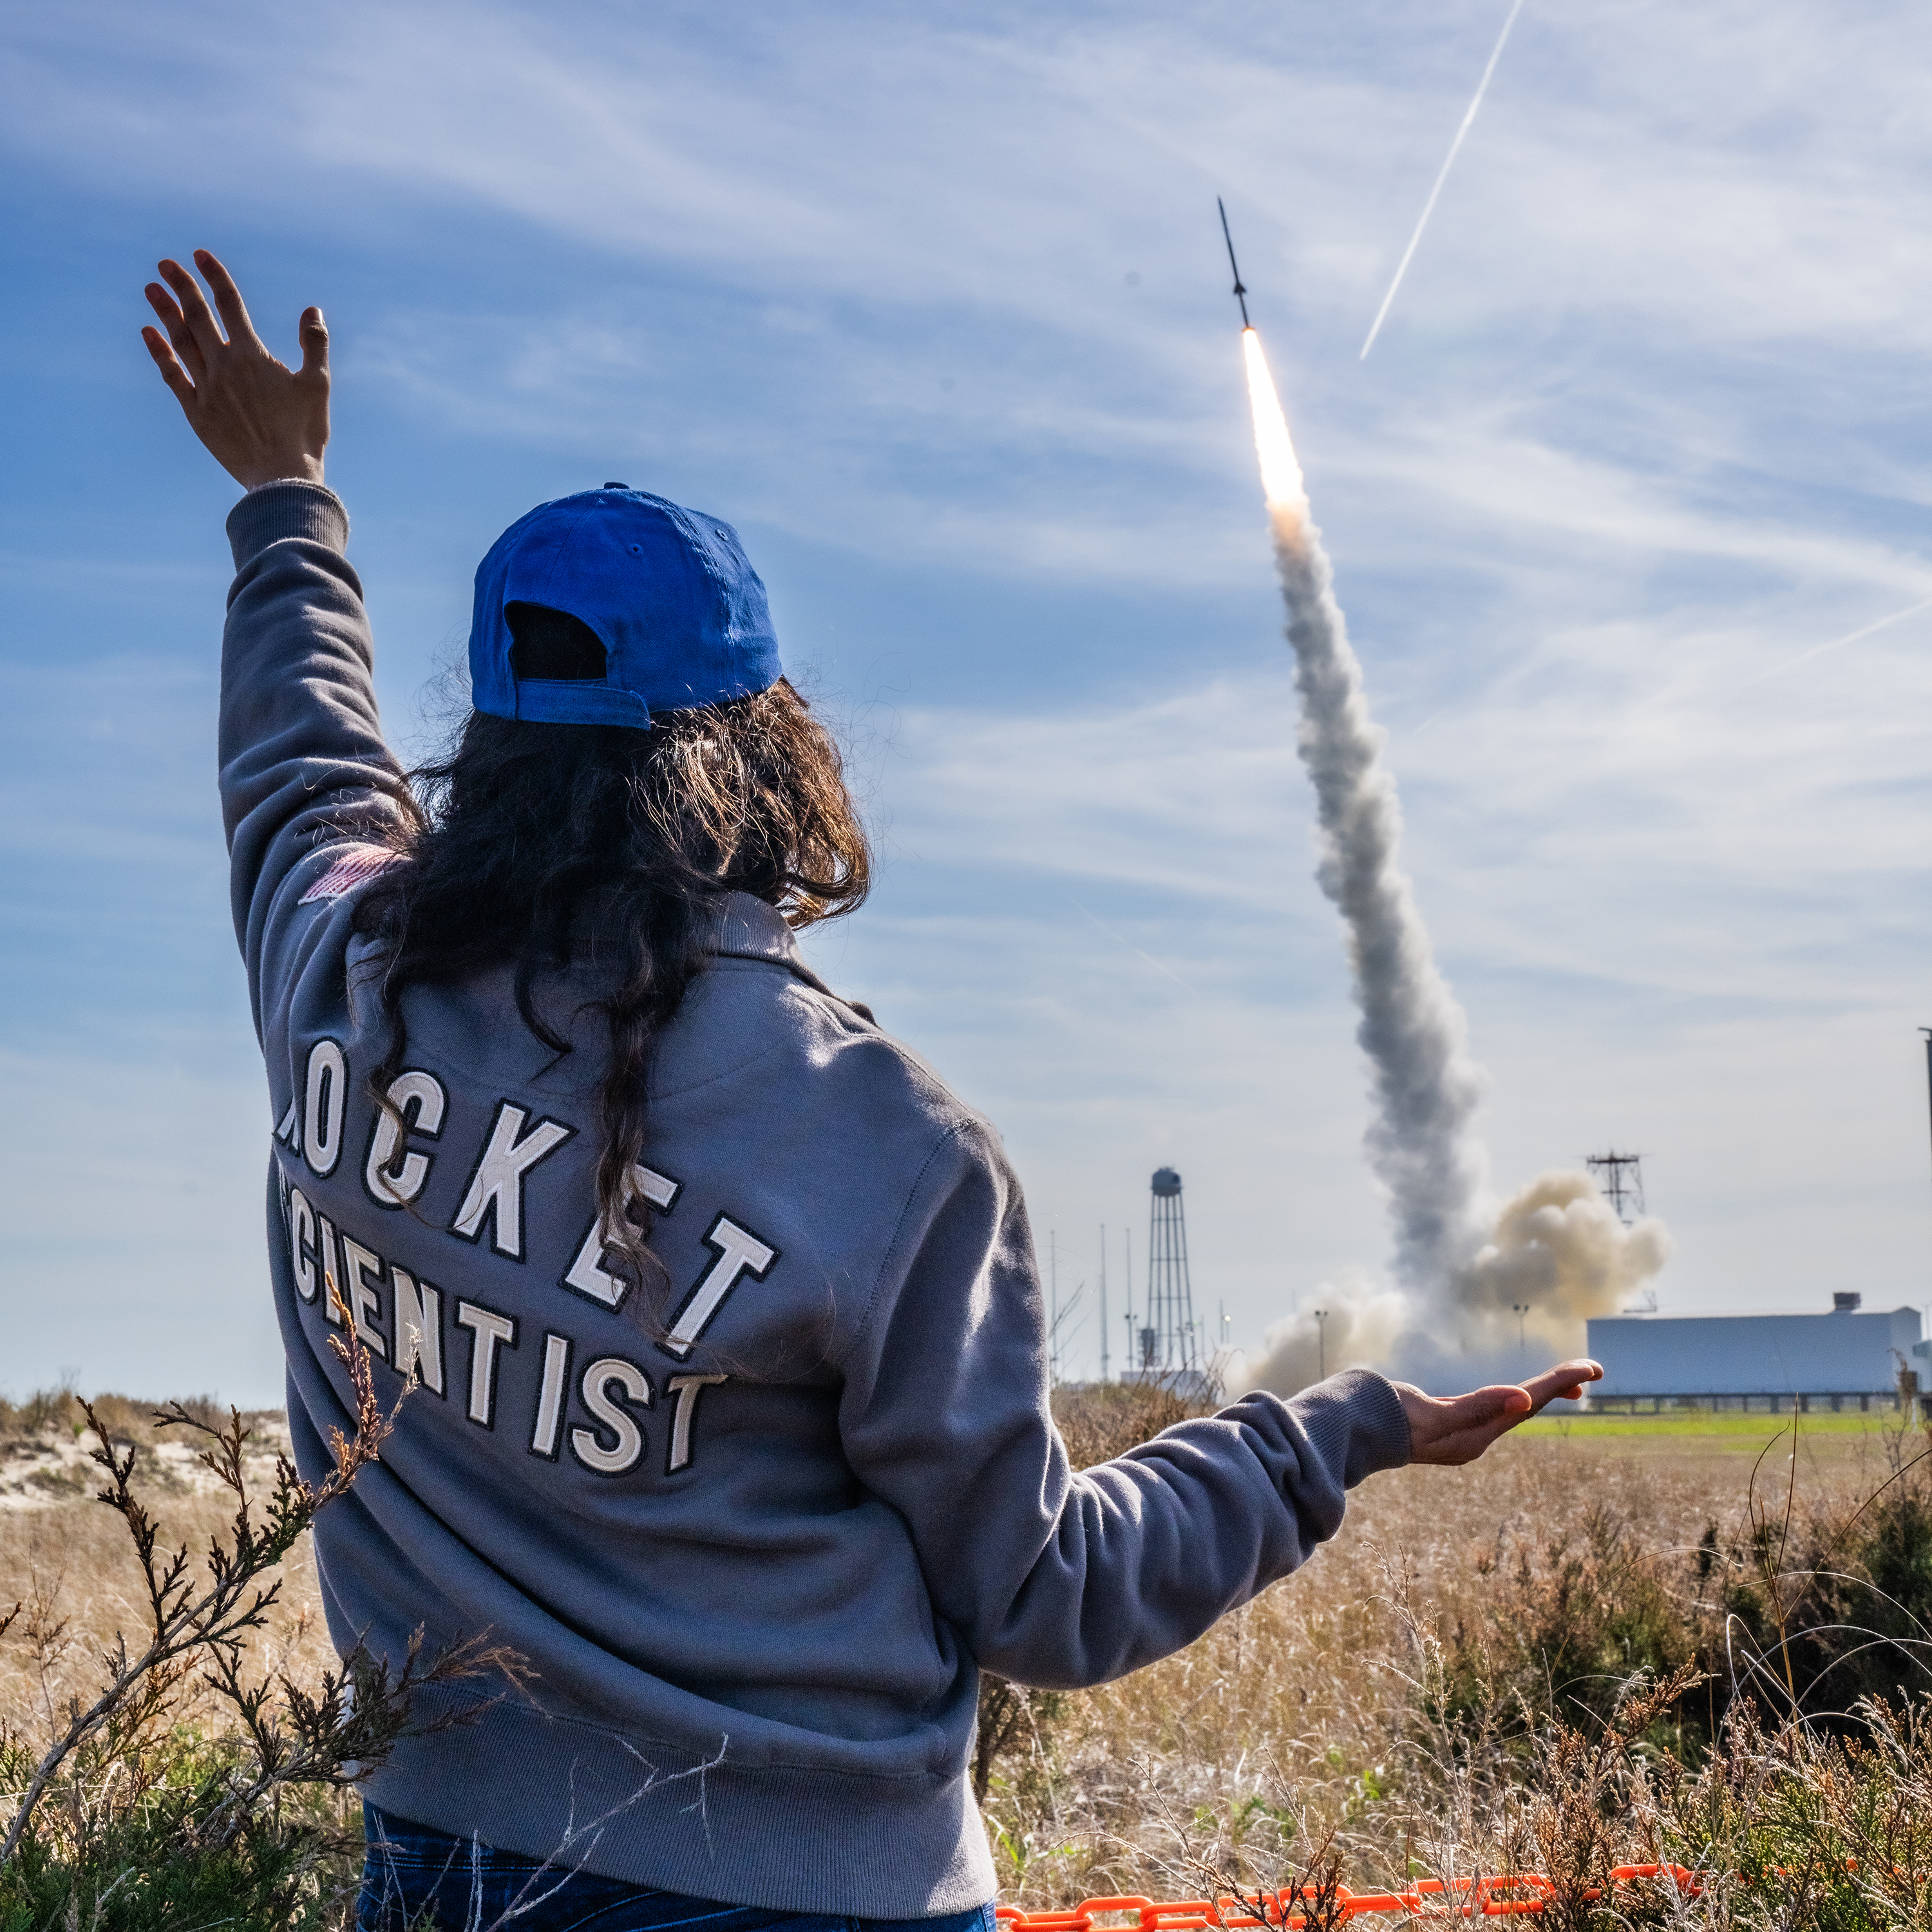 Cindy Fuentes Rosal, wearing a light-blue jacket with the words "Rocket Scientist" in white on the back, faces away from the camera with her hand in the air. In the background is a sounding rocket launching from a launch pad with a thick white trail of smoke underneath.